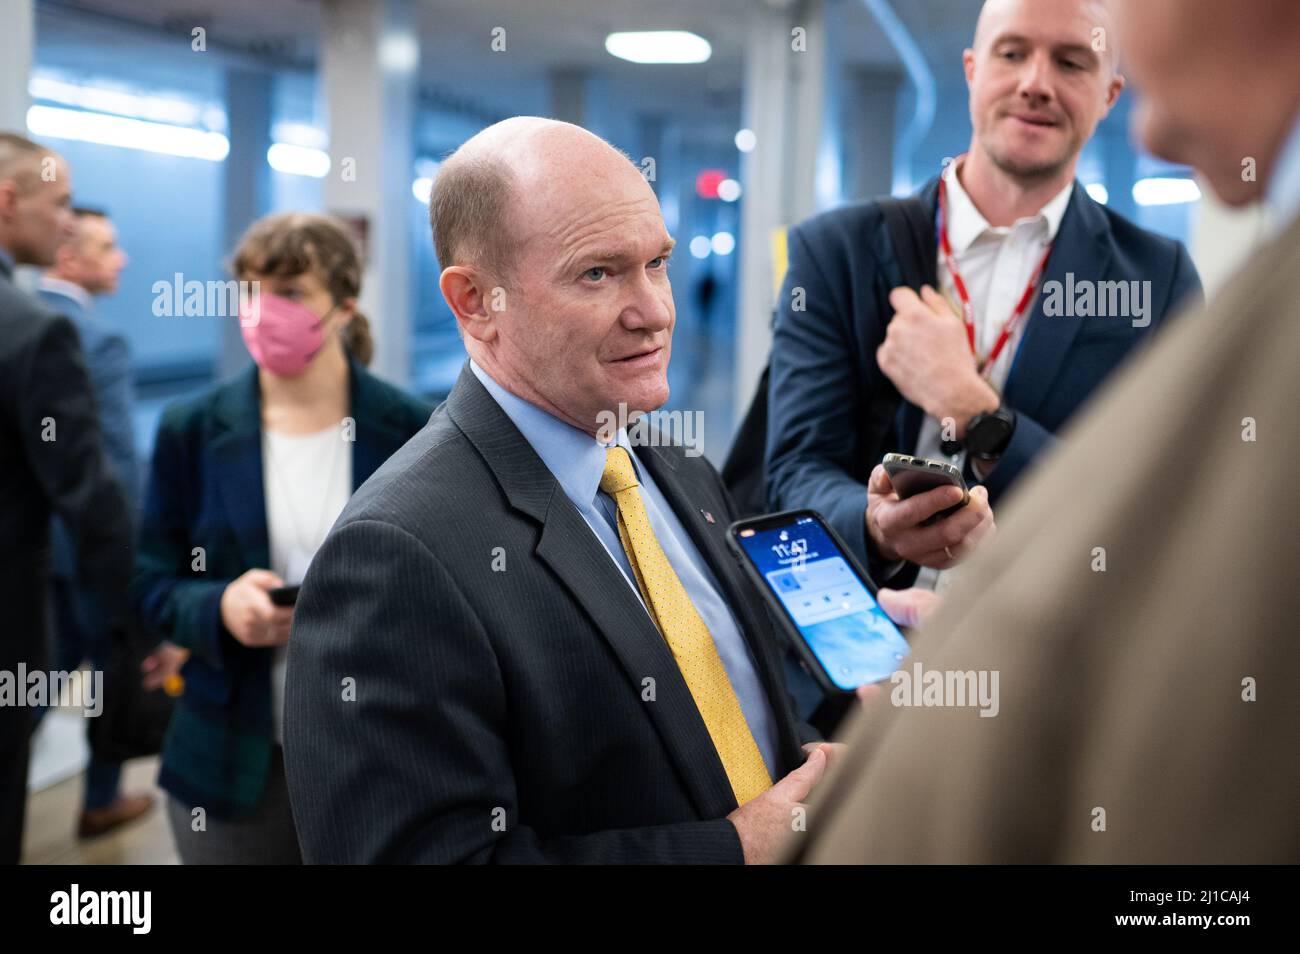 Washington, USA. 24th Mar, 2022. Senator Chris Coons (D-DE) speaks to media in the Senate Subway at the U.S. Capitol, in Washington, DC, on Thursday, March 24, 2022. Republicans grilled President Joe Biden's nominee to the Supreme Court Judge Kentanji Brown Jackson during two days of questioning this week, accusing her of being soft on crime and demanding additional information from the White House. (Graeme Sloan/Sipa USA) Credit: Sipa USA/Alamy Live News Stock Photo